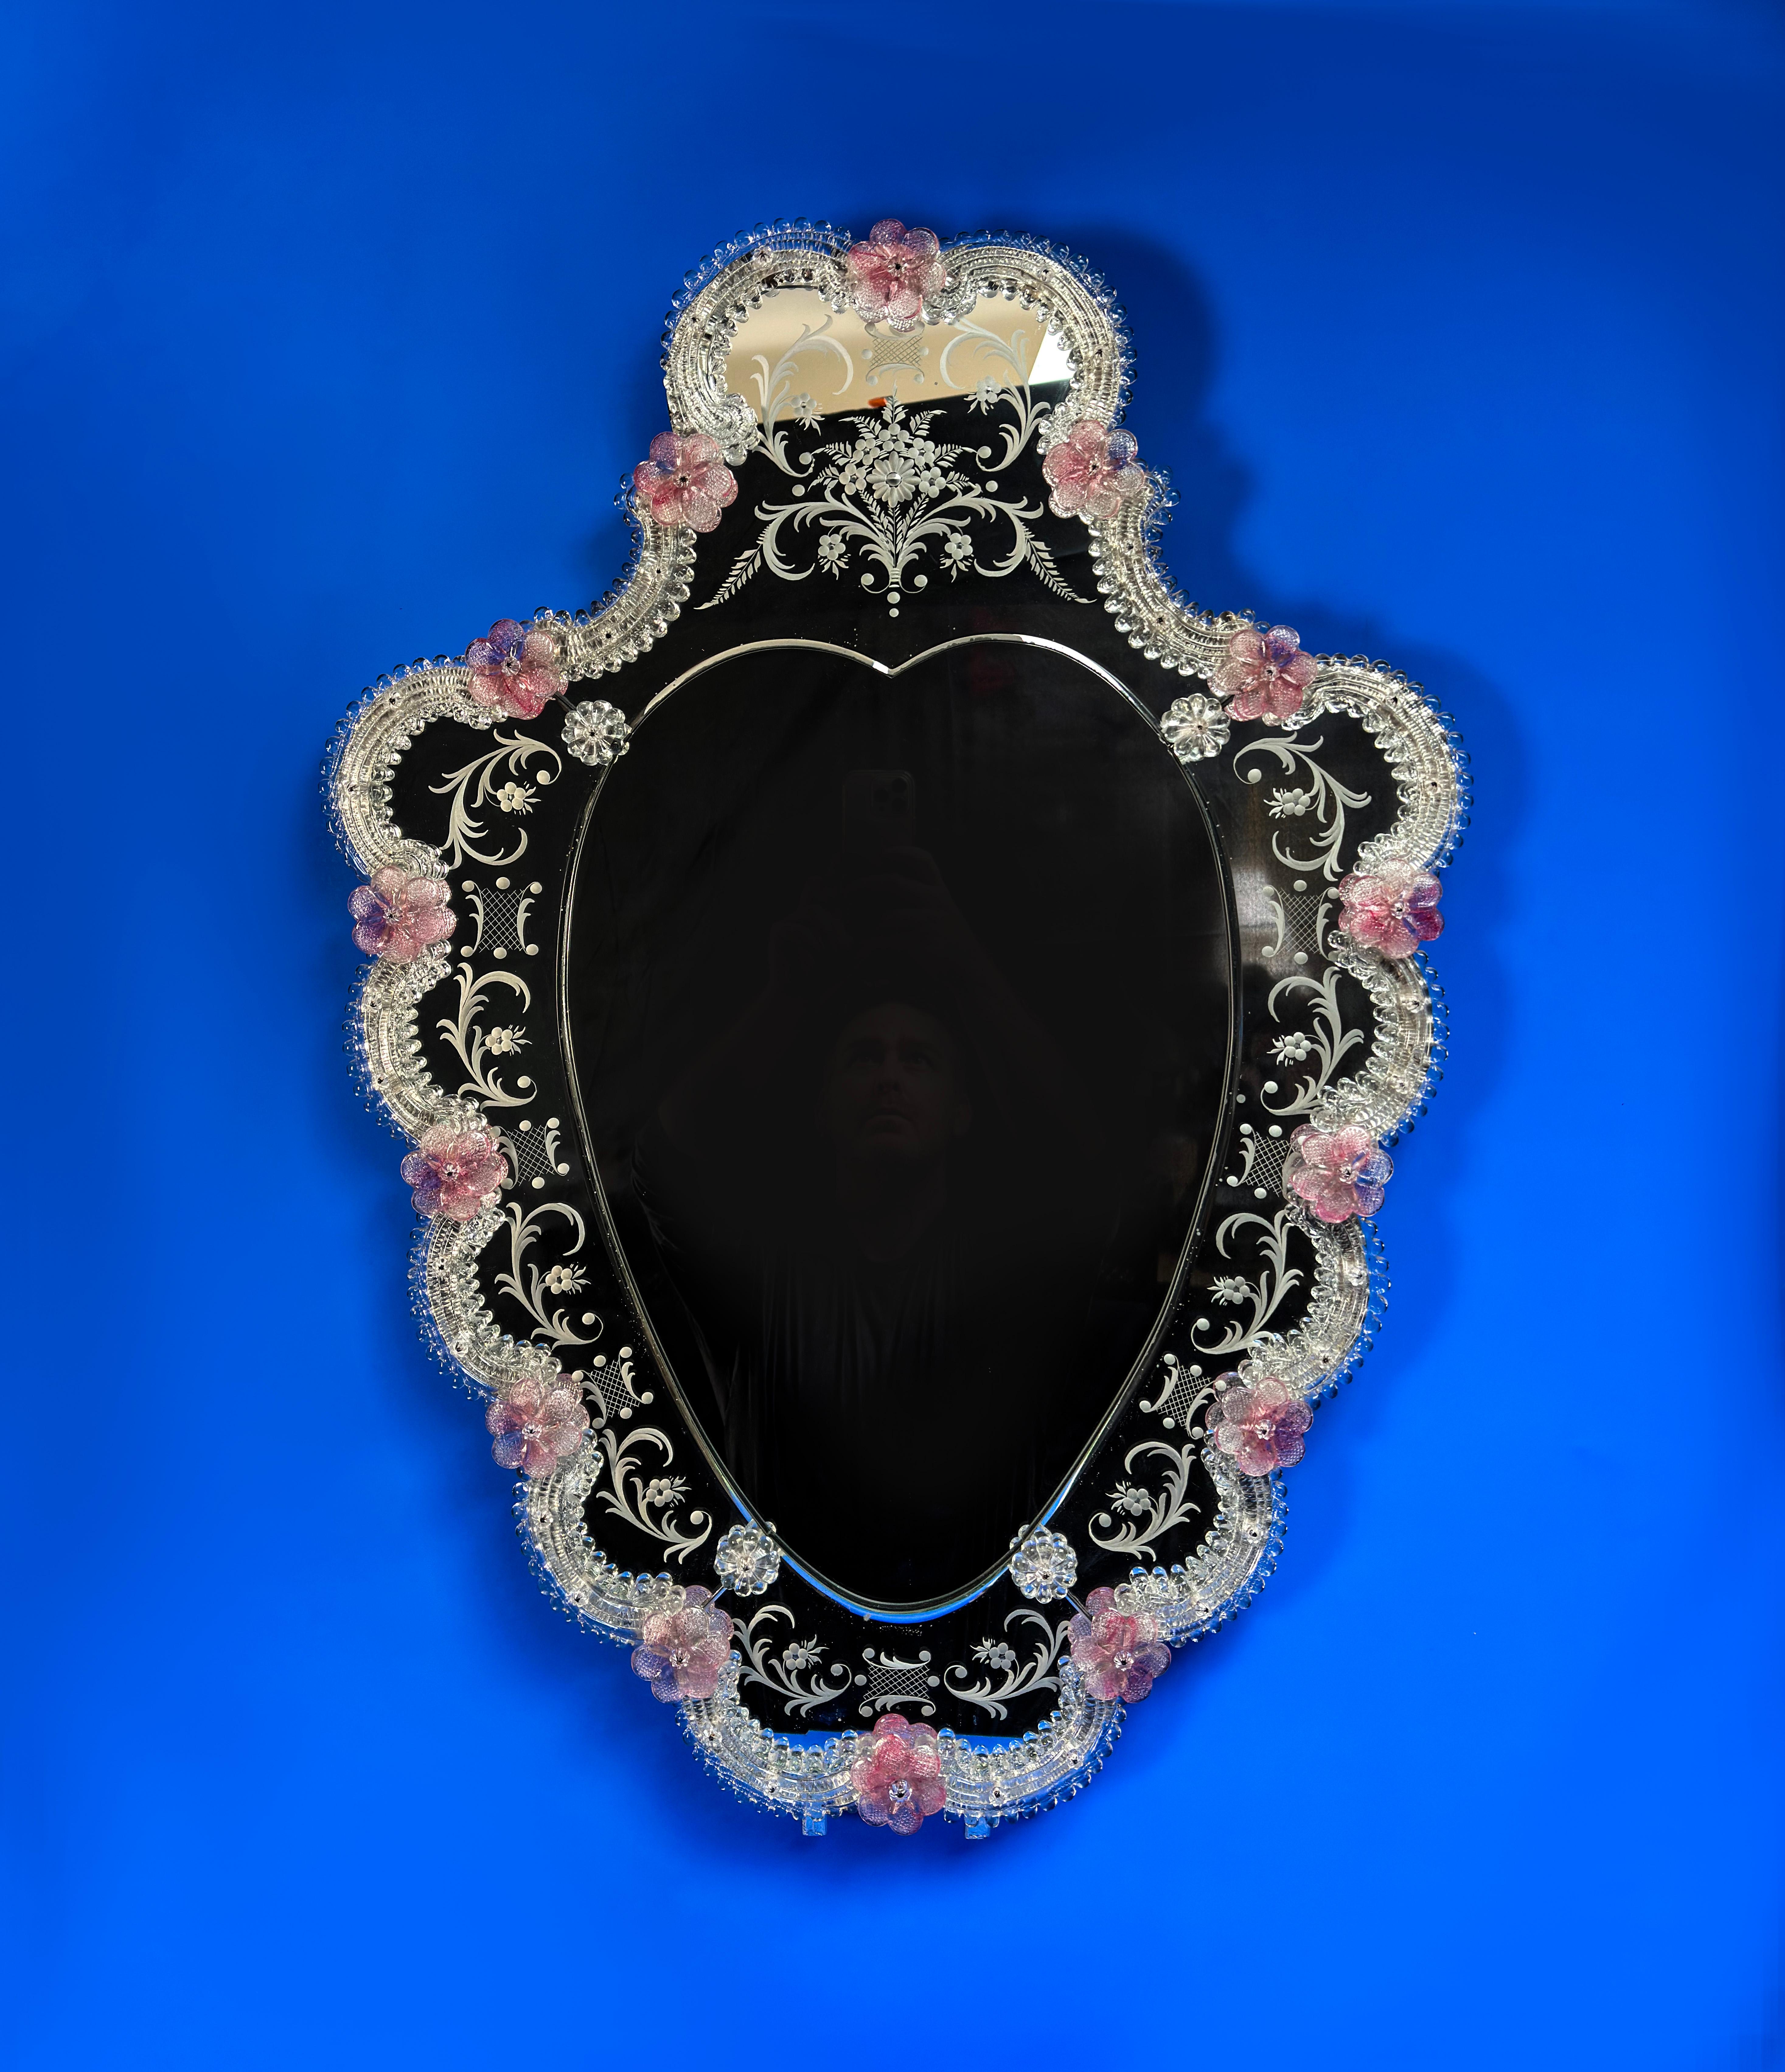  1960's Heart-Shaped Venetian Mirror 

This exquisite heart-shaped Venetian mirror, crafted in the 1960s, exemplifies the renowned craftsmanship of Murano glass artisans. Its shield-like frame, meticulously etched and engraved using the celebrated